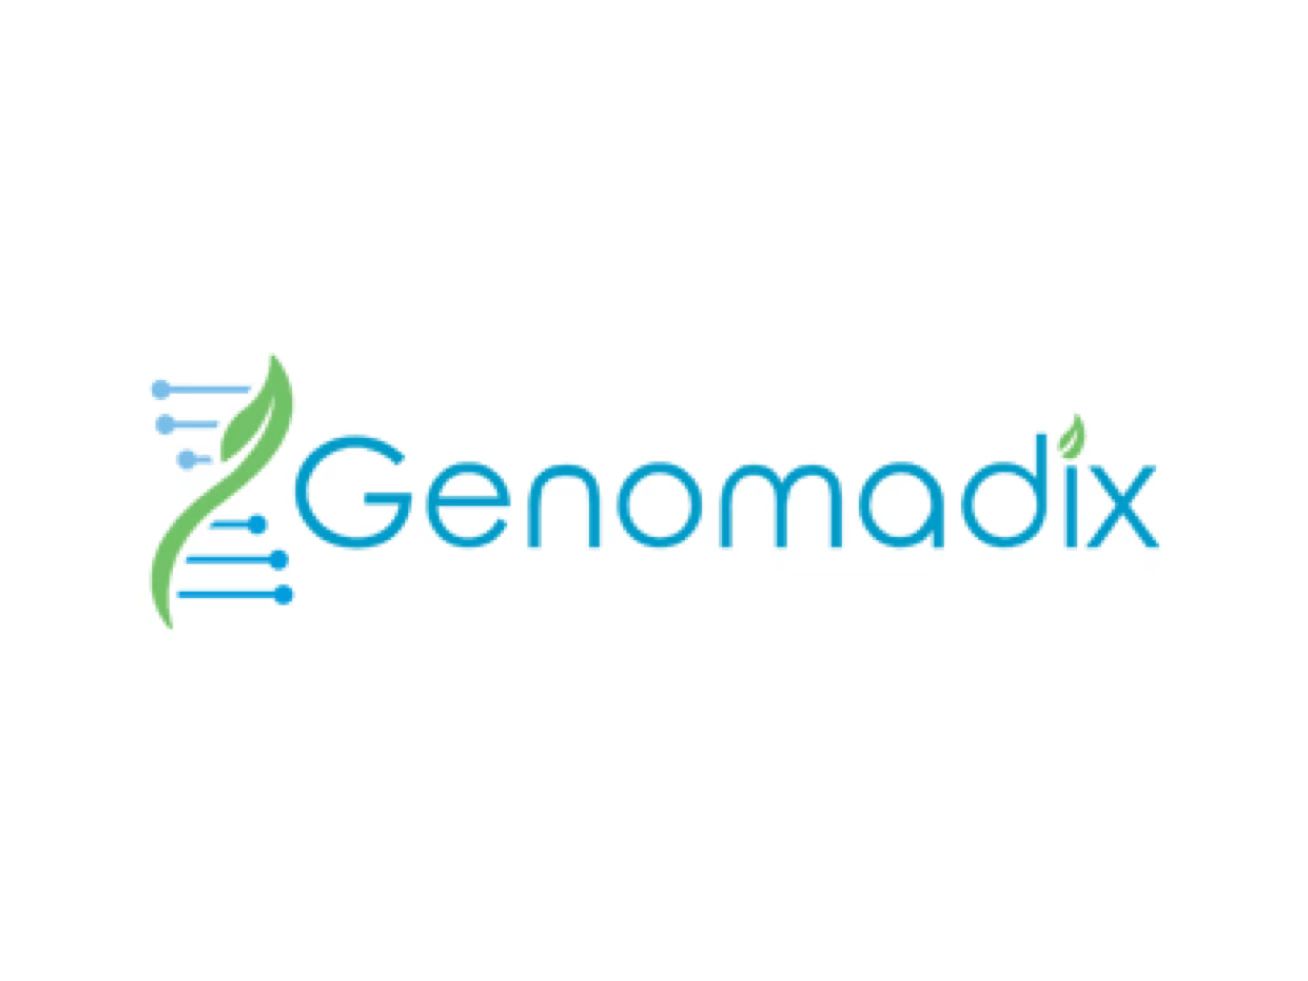 Genomadix Gets FDA 510(k) Clearance for Point-of-Care PCR System, CYP2C19 Test